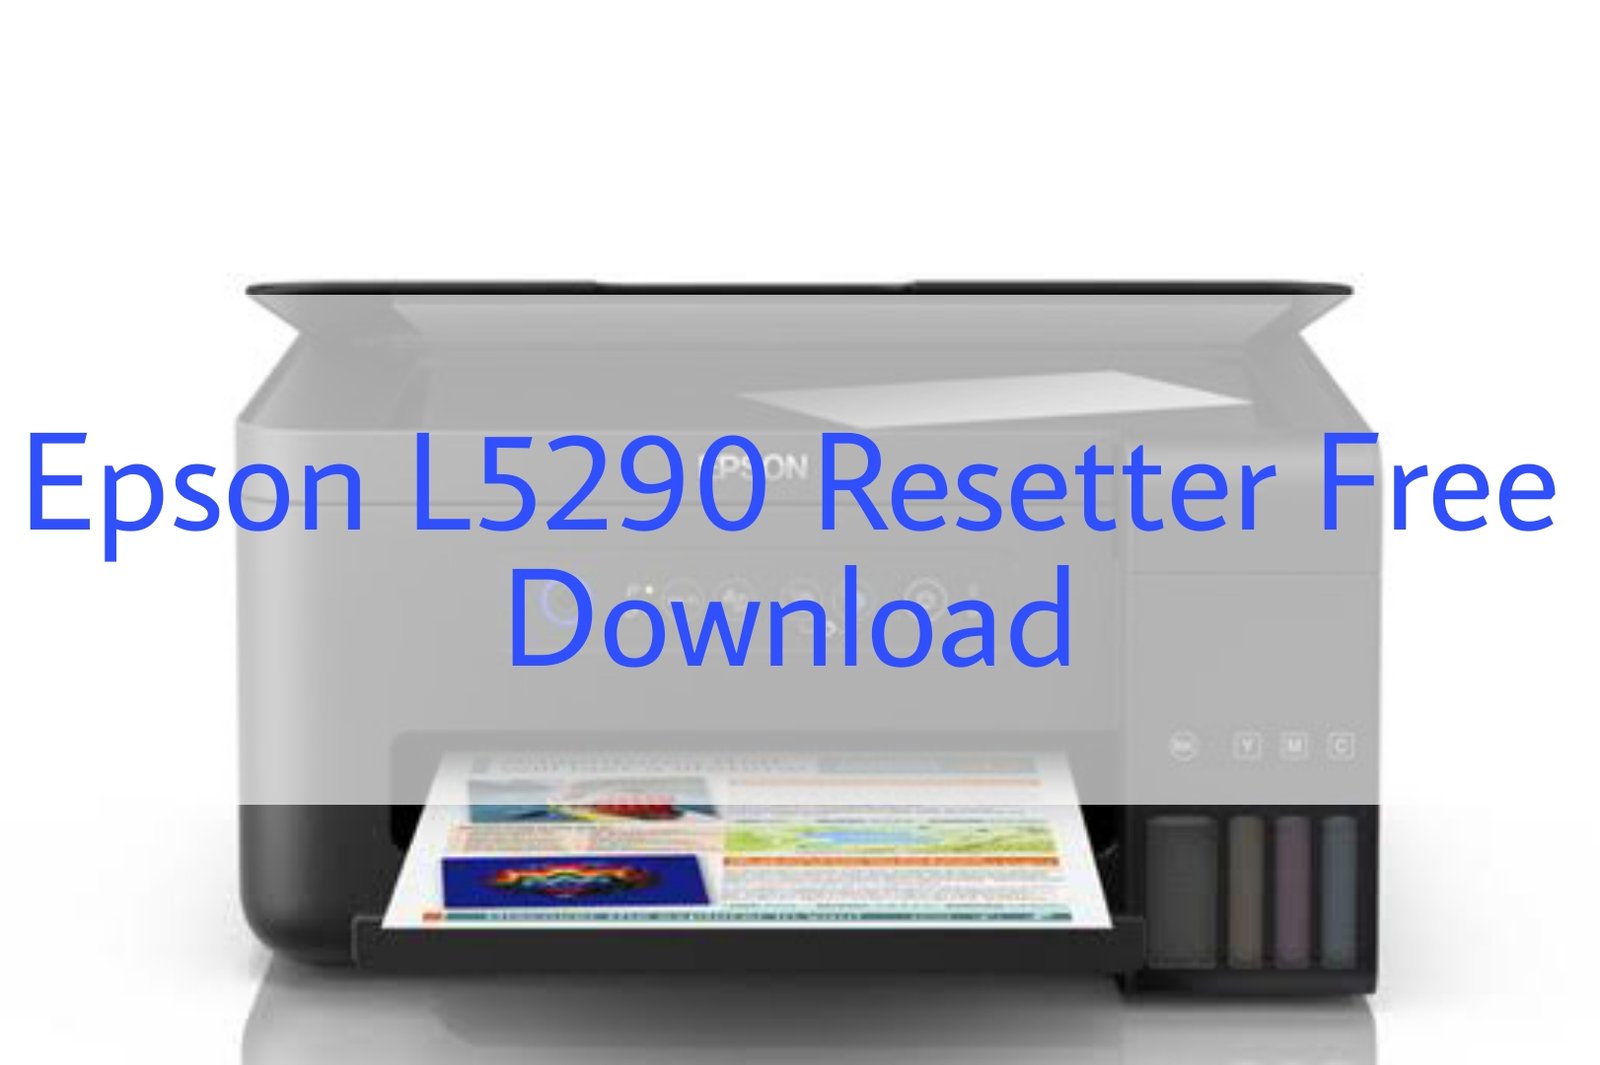 Epson L5290 Resetter Free Download 3472